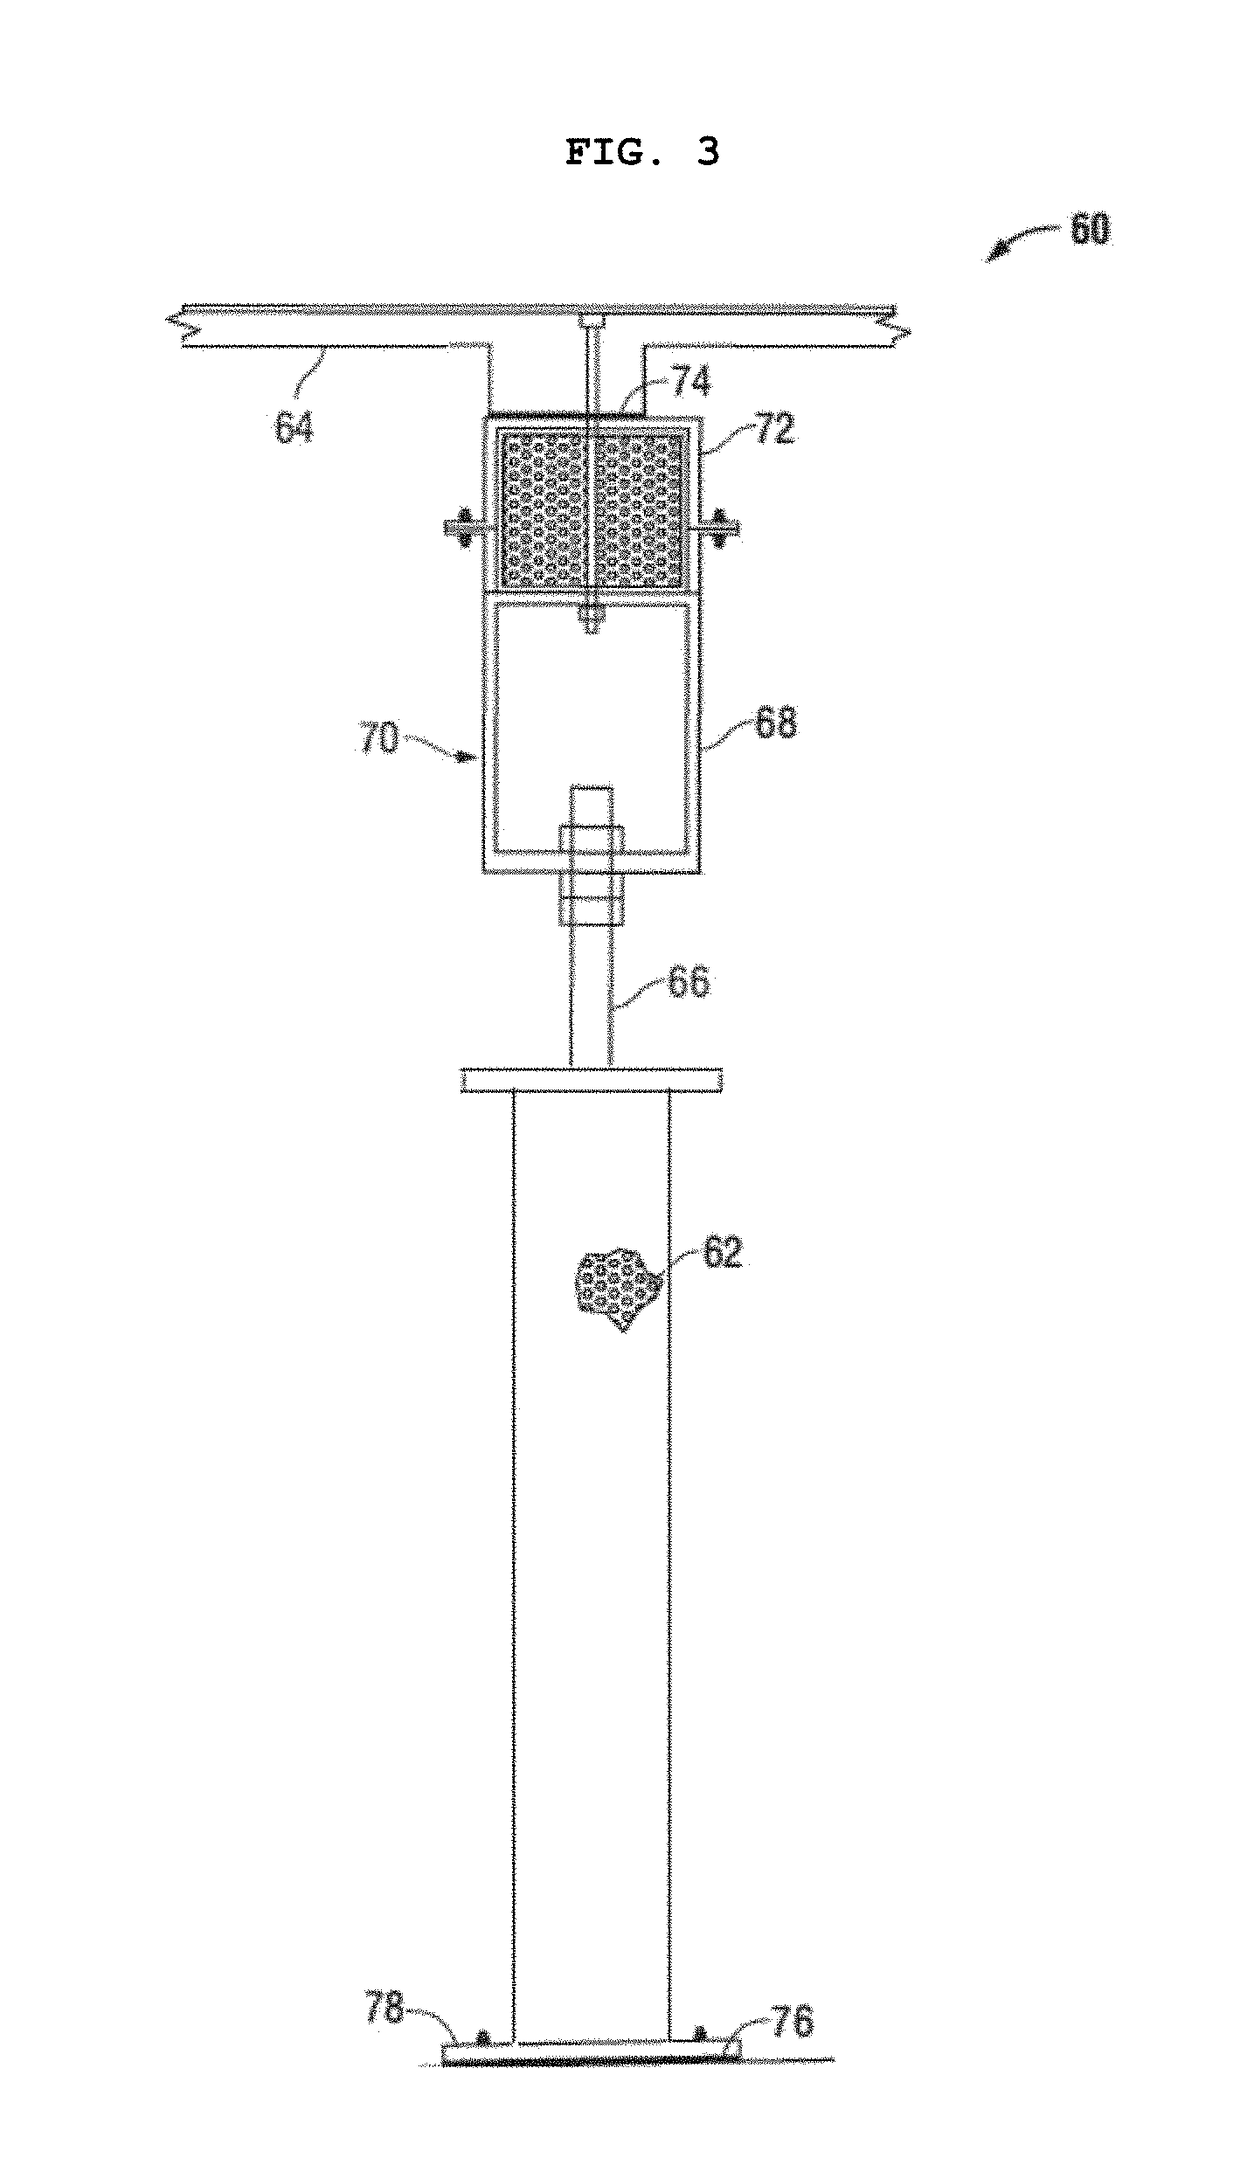 Method for improved semiconductor processing equipment tool pedestal / pad vibration isolation and reduction